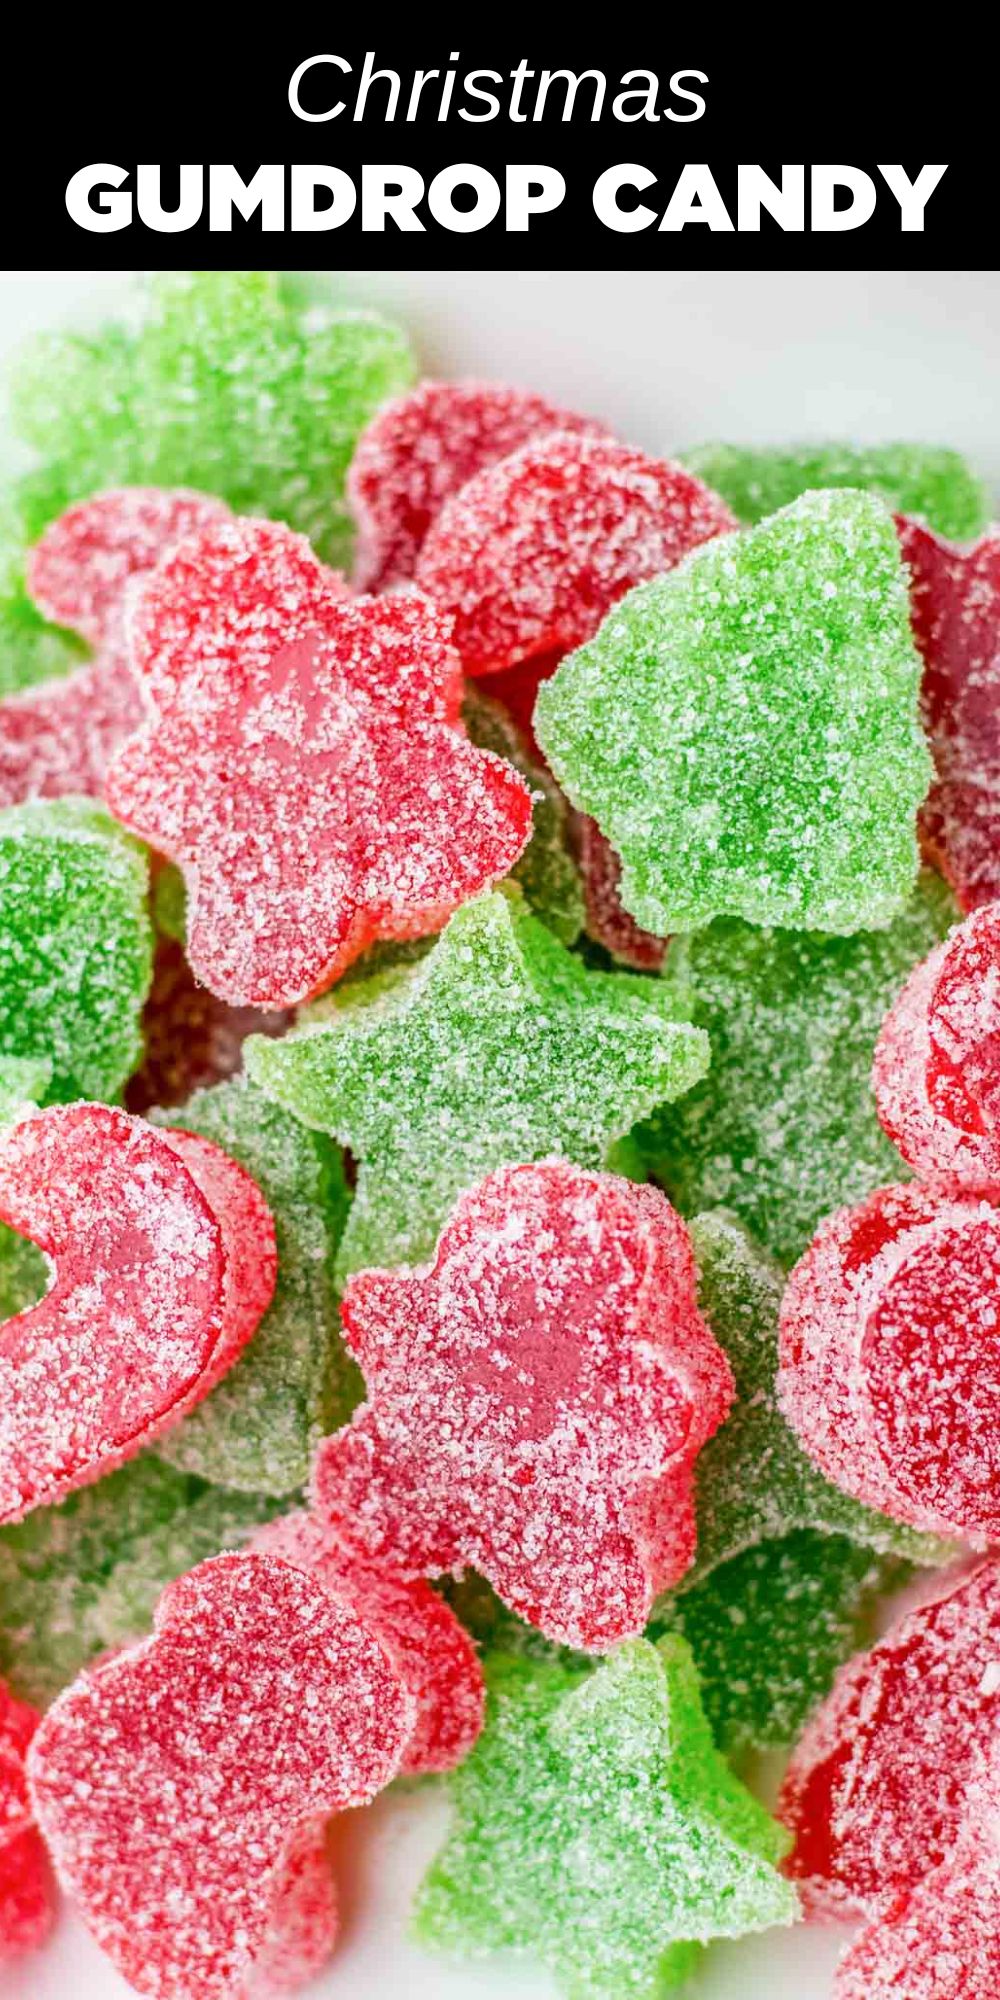 These Christmas gumdrops are a versatile treat that you’ll want to make for all your holiday events. They’re delicious and easy homemade candies that are sure to become a Christmas favorite.